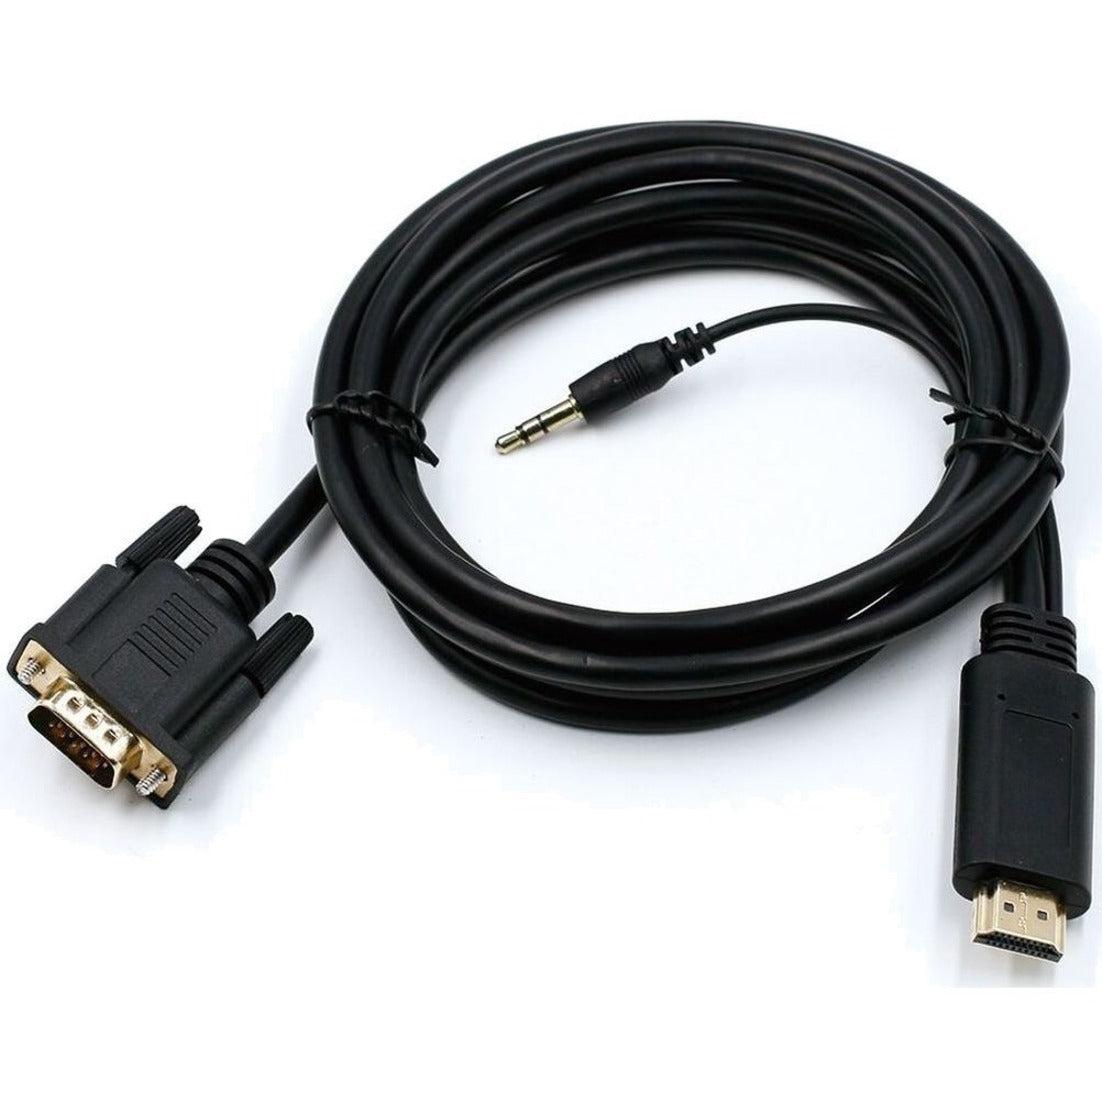 4XEM 4XHDMIVGA3FT HDMI to VGA with 3.5mm Audio Cable, Active, Plug & Play, 3 ft Length